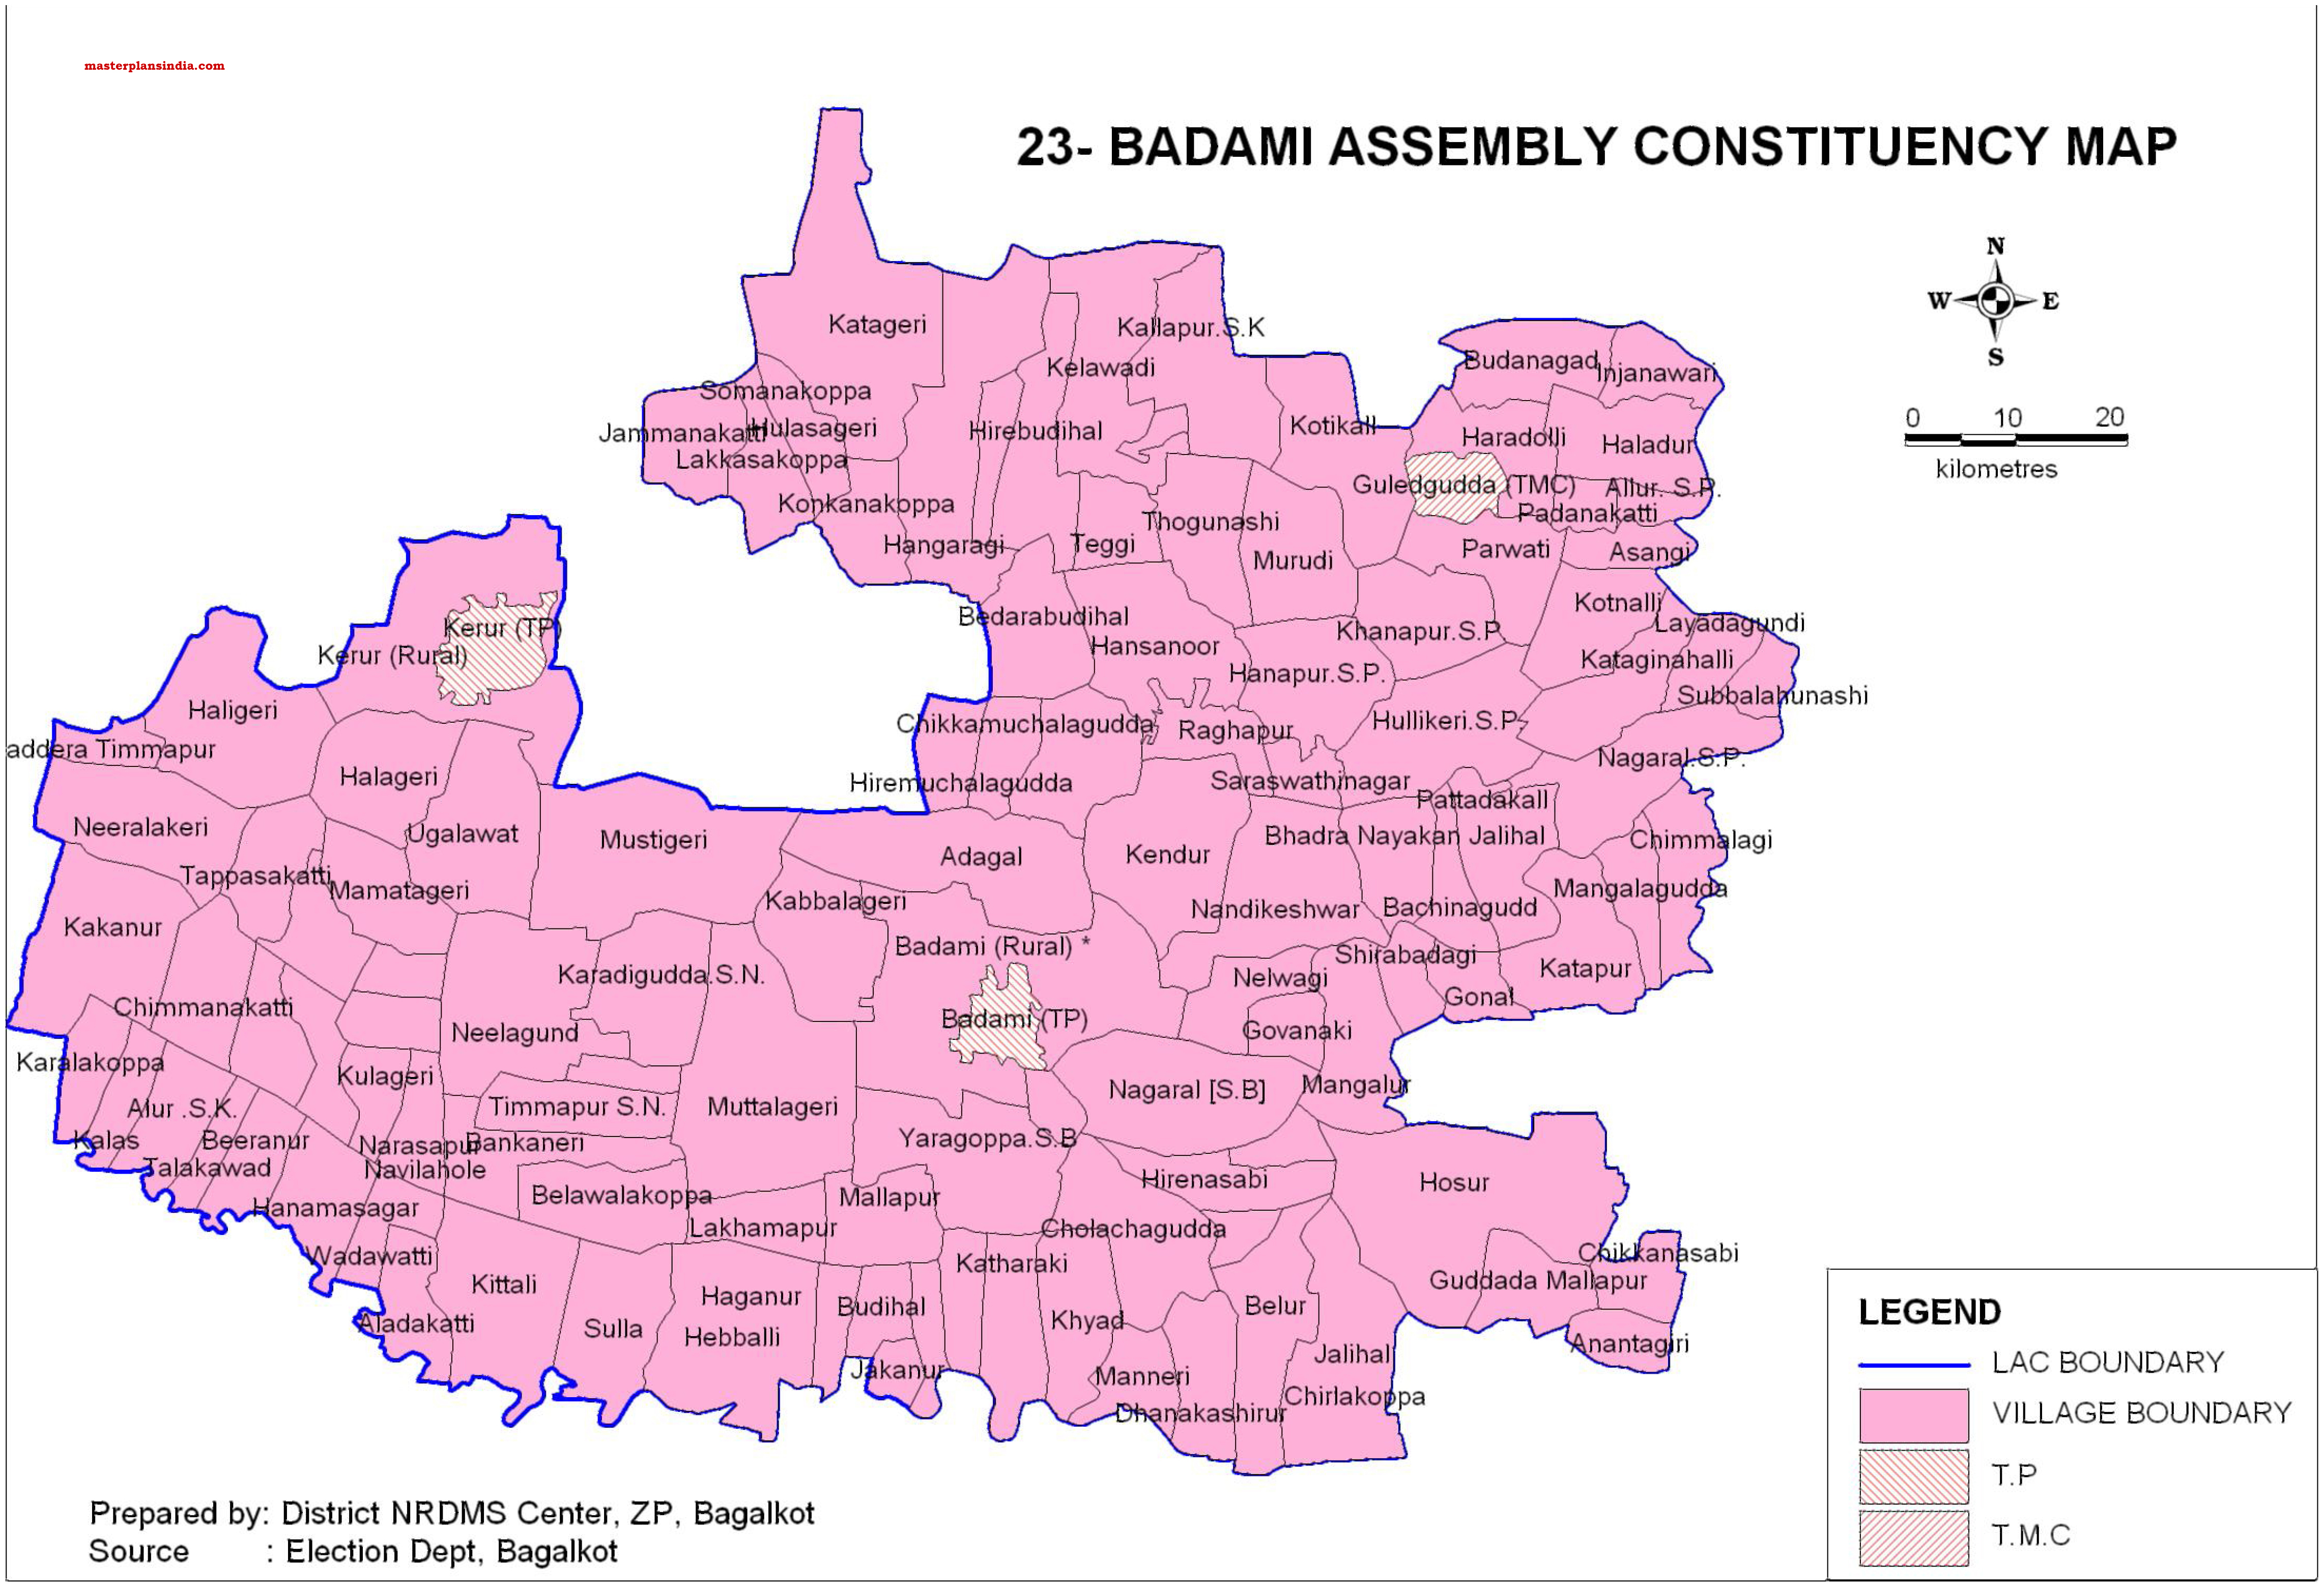 Badami Assembly Constituency Map PDF Download - Master Plans India4567 x 3120